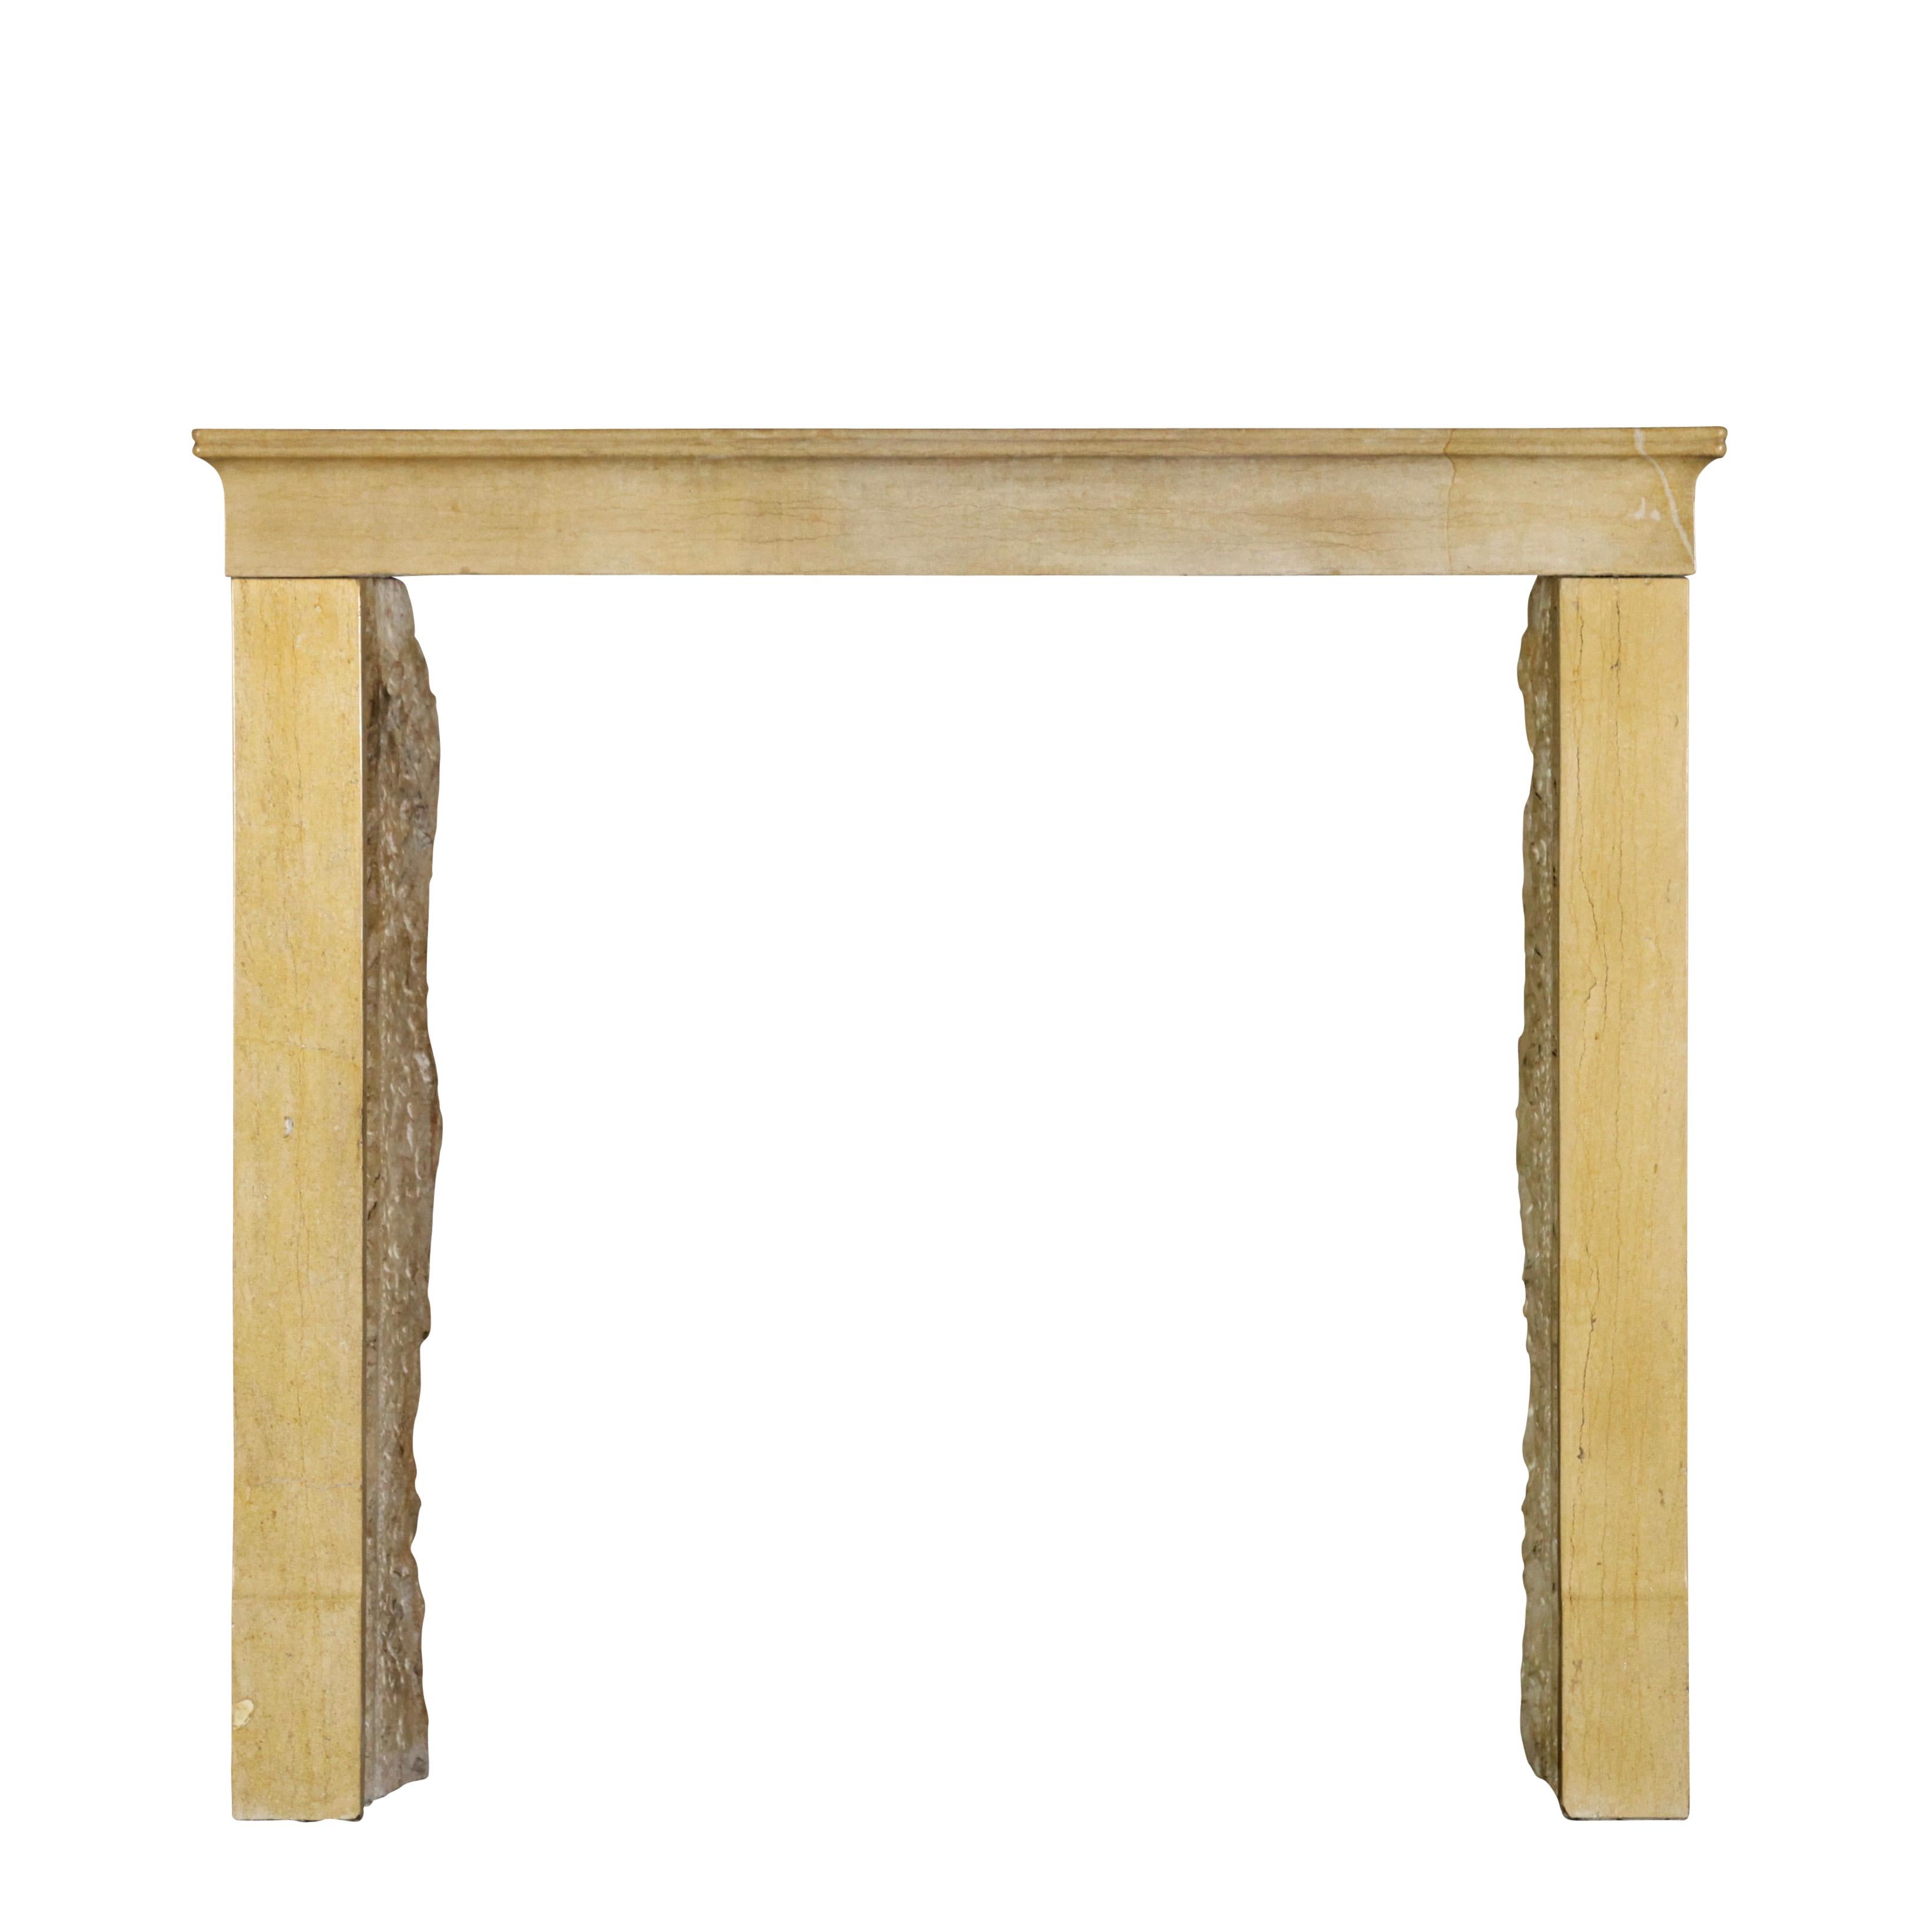 A 19th century French elegant mantle. This is a petite original antique fireplace surround. A typical petite bourguignon in it typical honey color hard stone from that region. Dijon. Perfect to create a cosy room with a timeless, eclectic